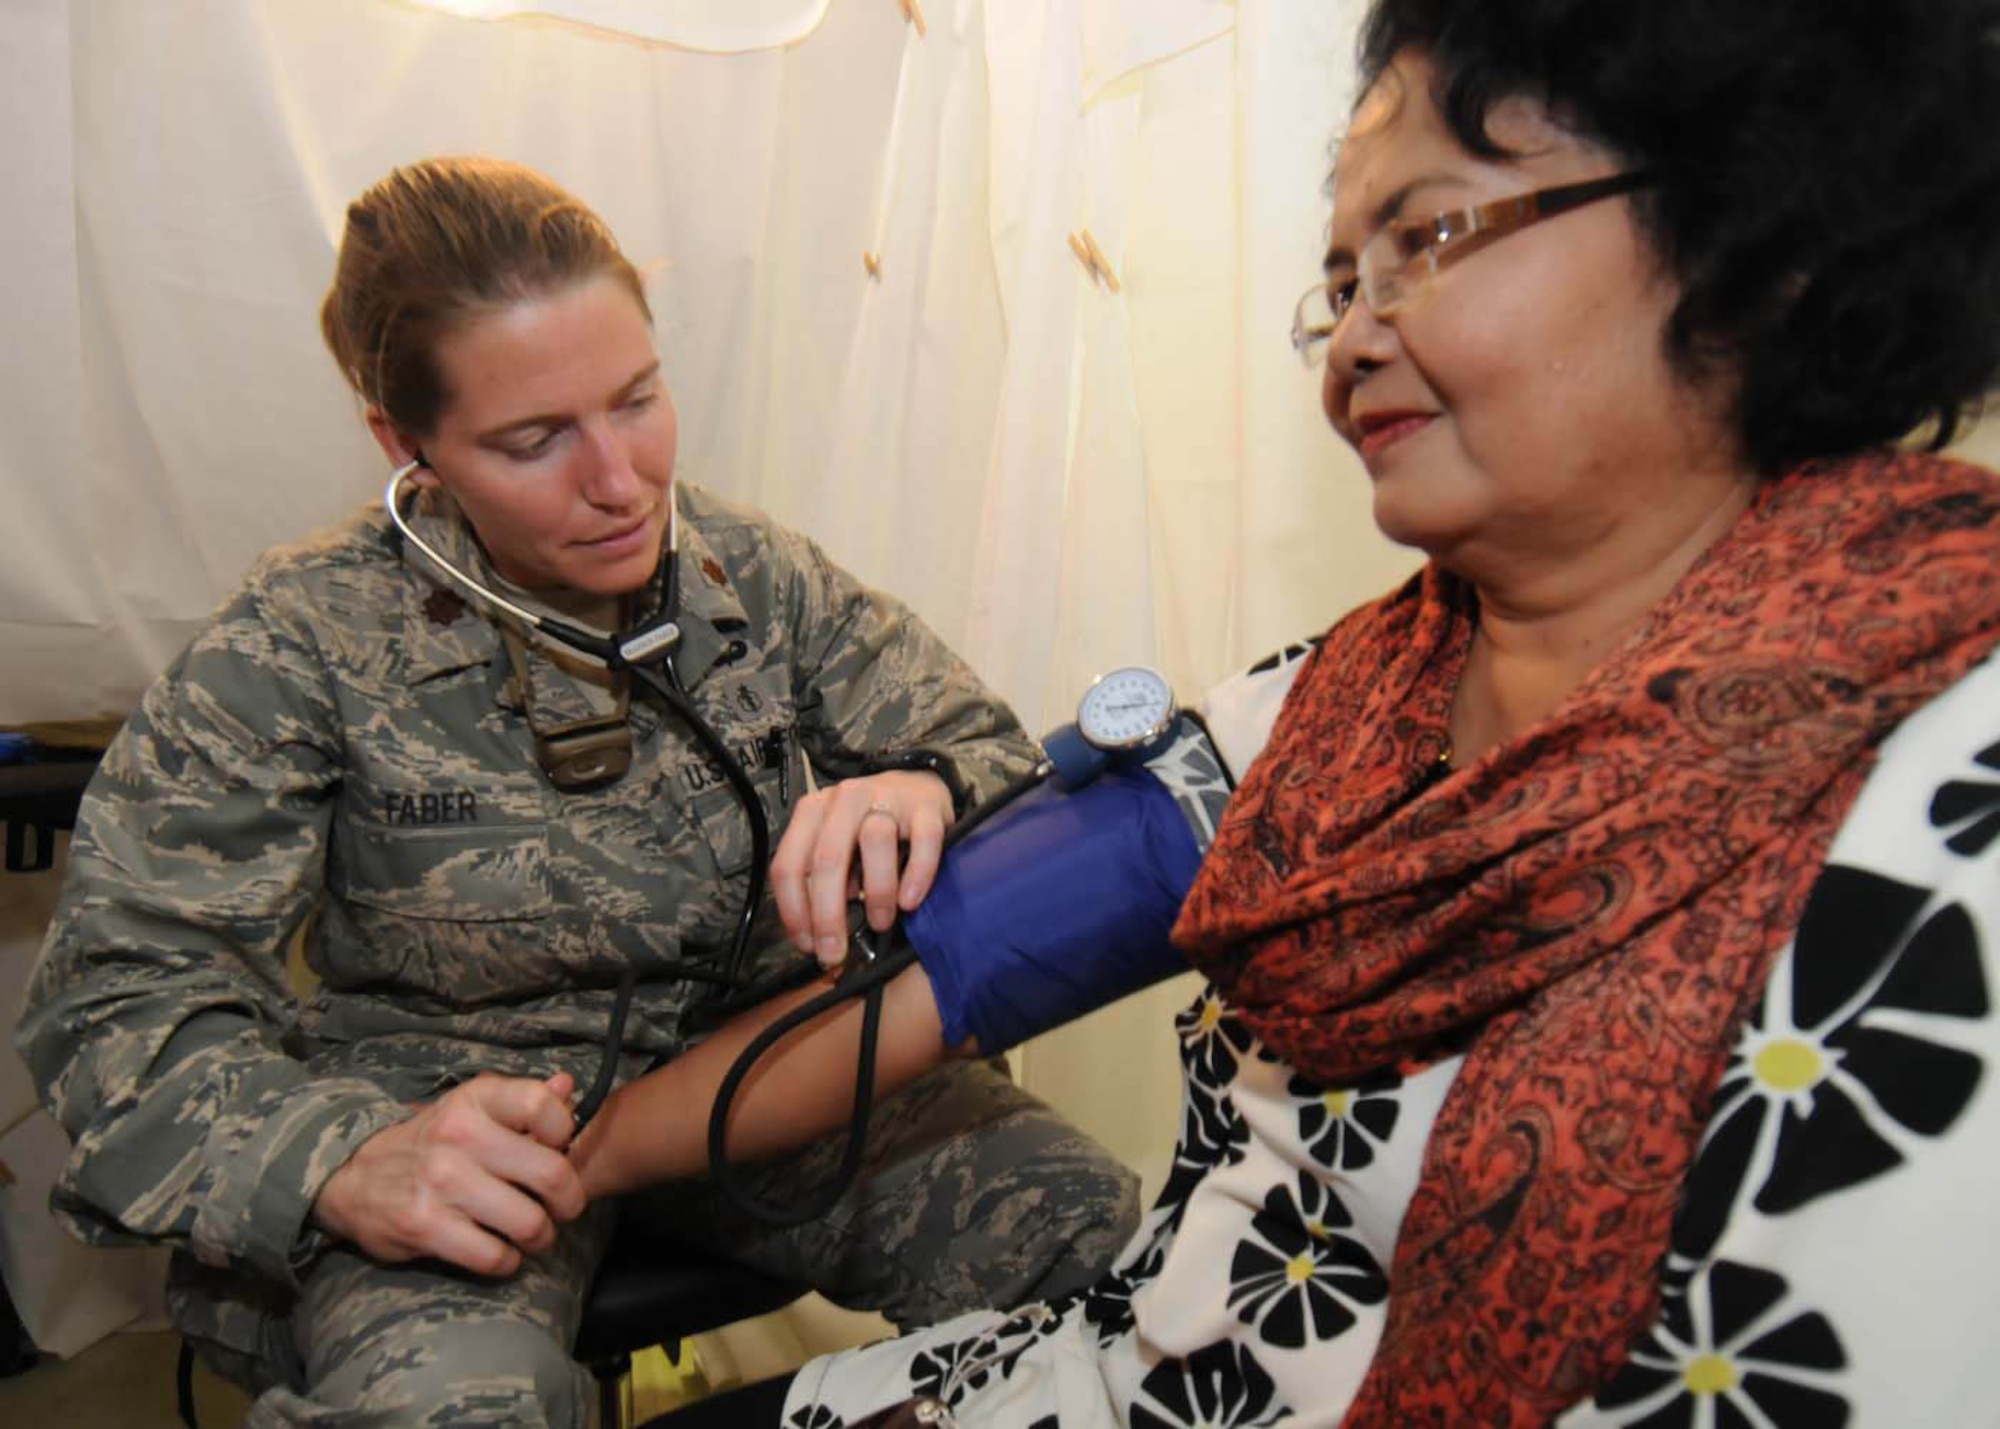 PADANG, Indonesia -- Maj. Shannon Faber checks a patient's blood presure during a medical assessment at a mobile field hospital Oct. 8. Major Faber, an emergency medical doctor from the 3rd Medical Operations Squadron at Elmendorf Air Force Base, Alaska, is deployed here with a U.S. Air Force humanitarian assistance rapid response team. (U.S. Air Force photo/Staff Sgt. Veronica Pierce)